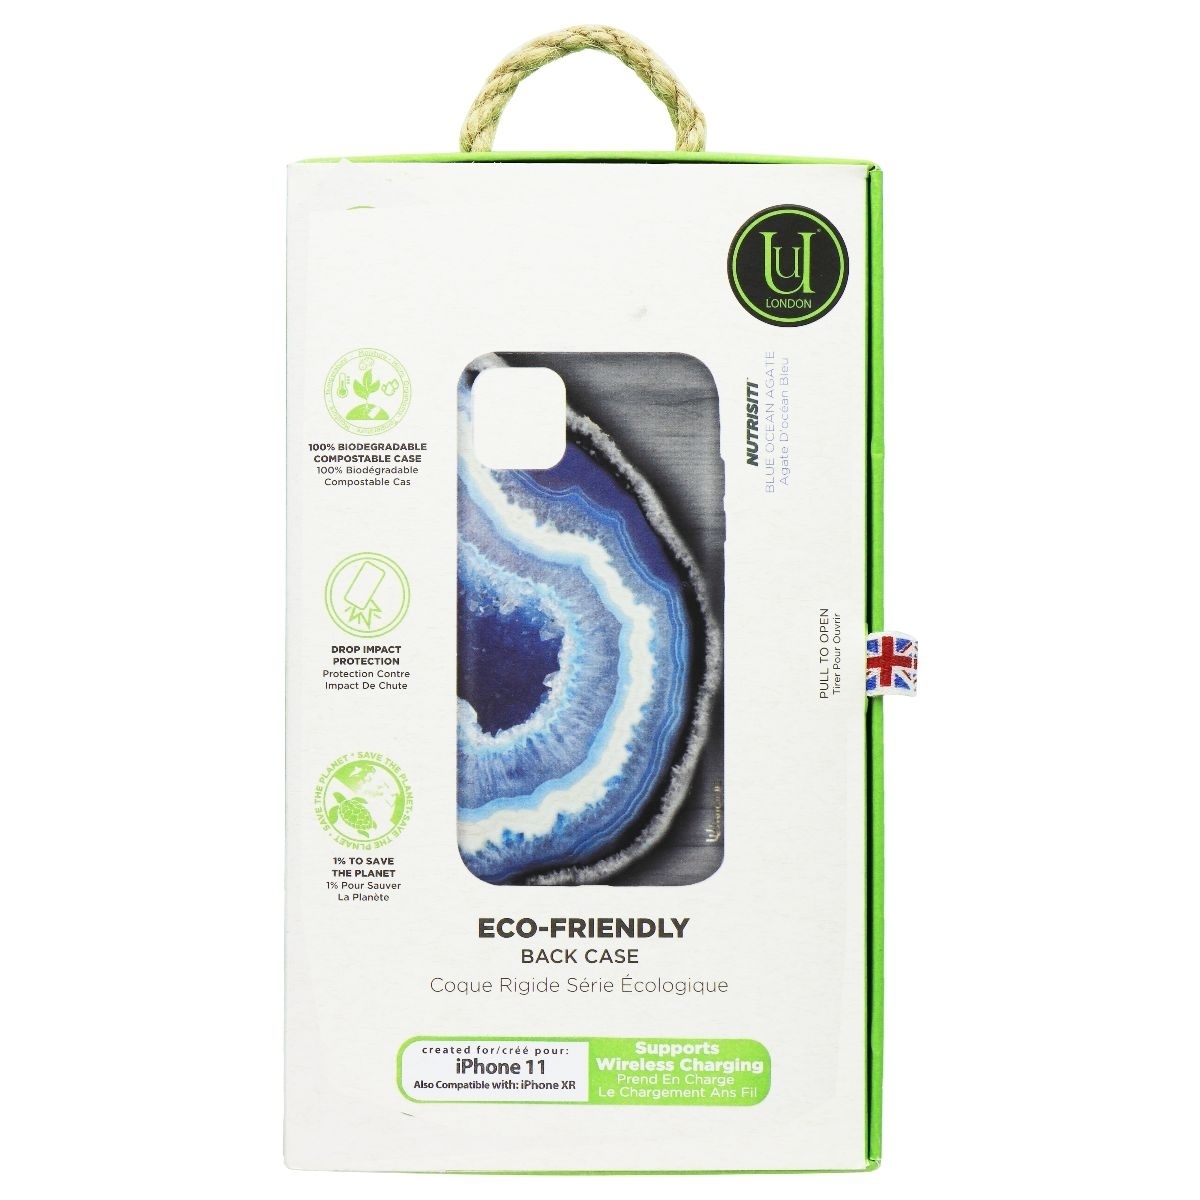 Unique London Eco-Friendly Back Case For Apple IPhone 11 And XR - Blue Geode (Refurbished)